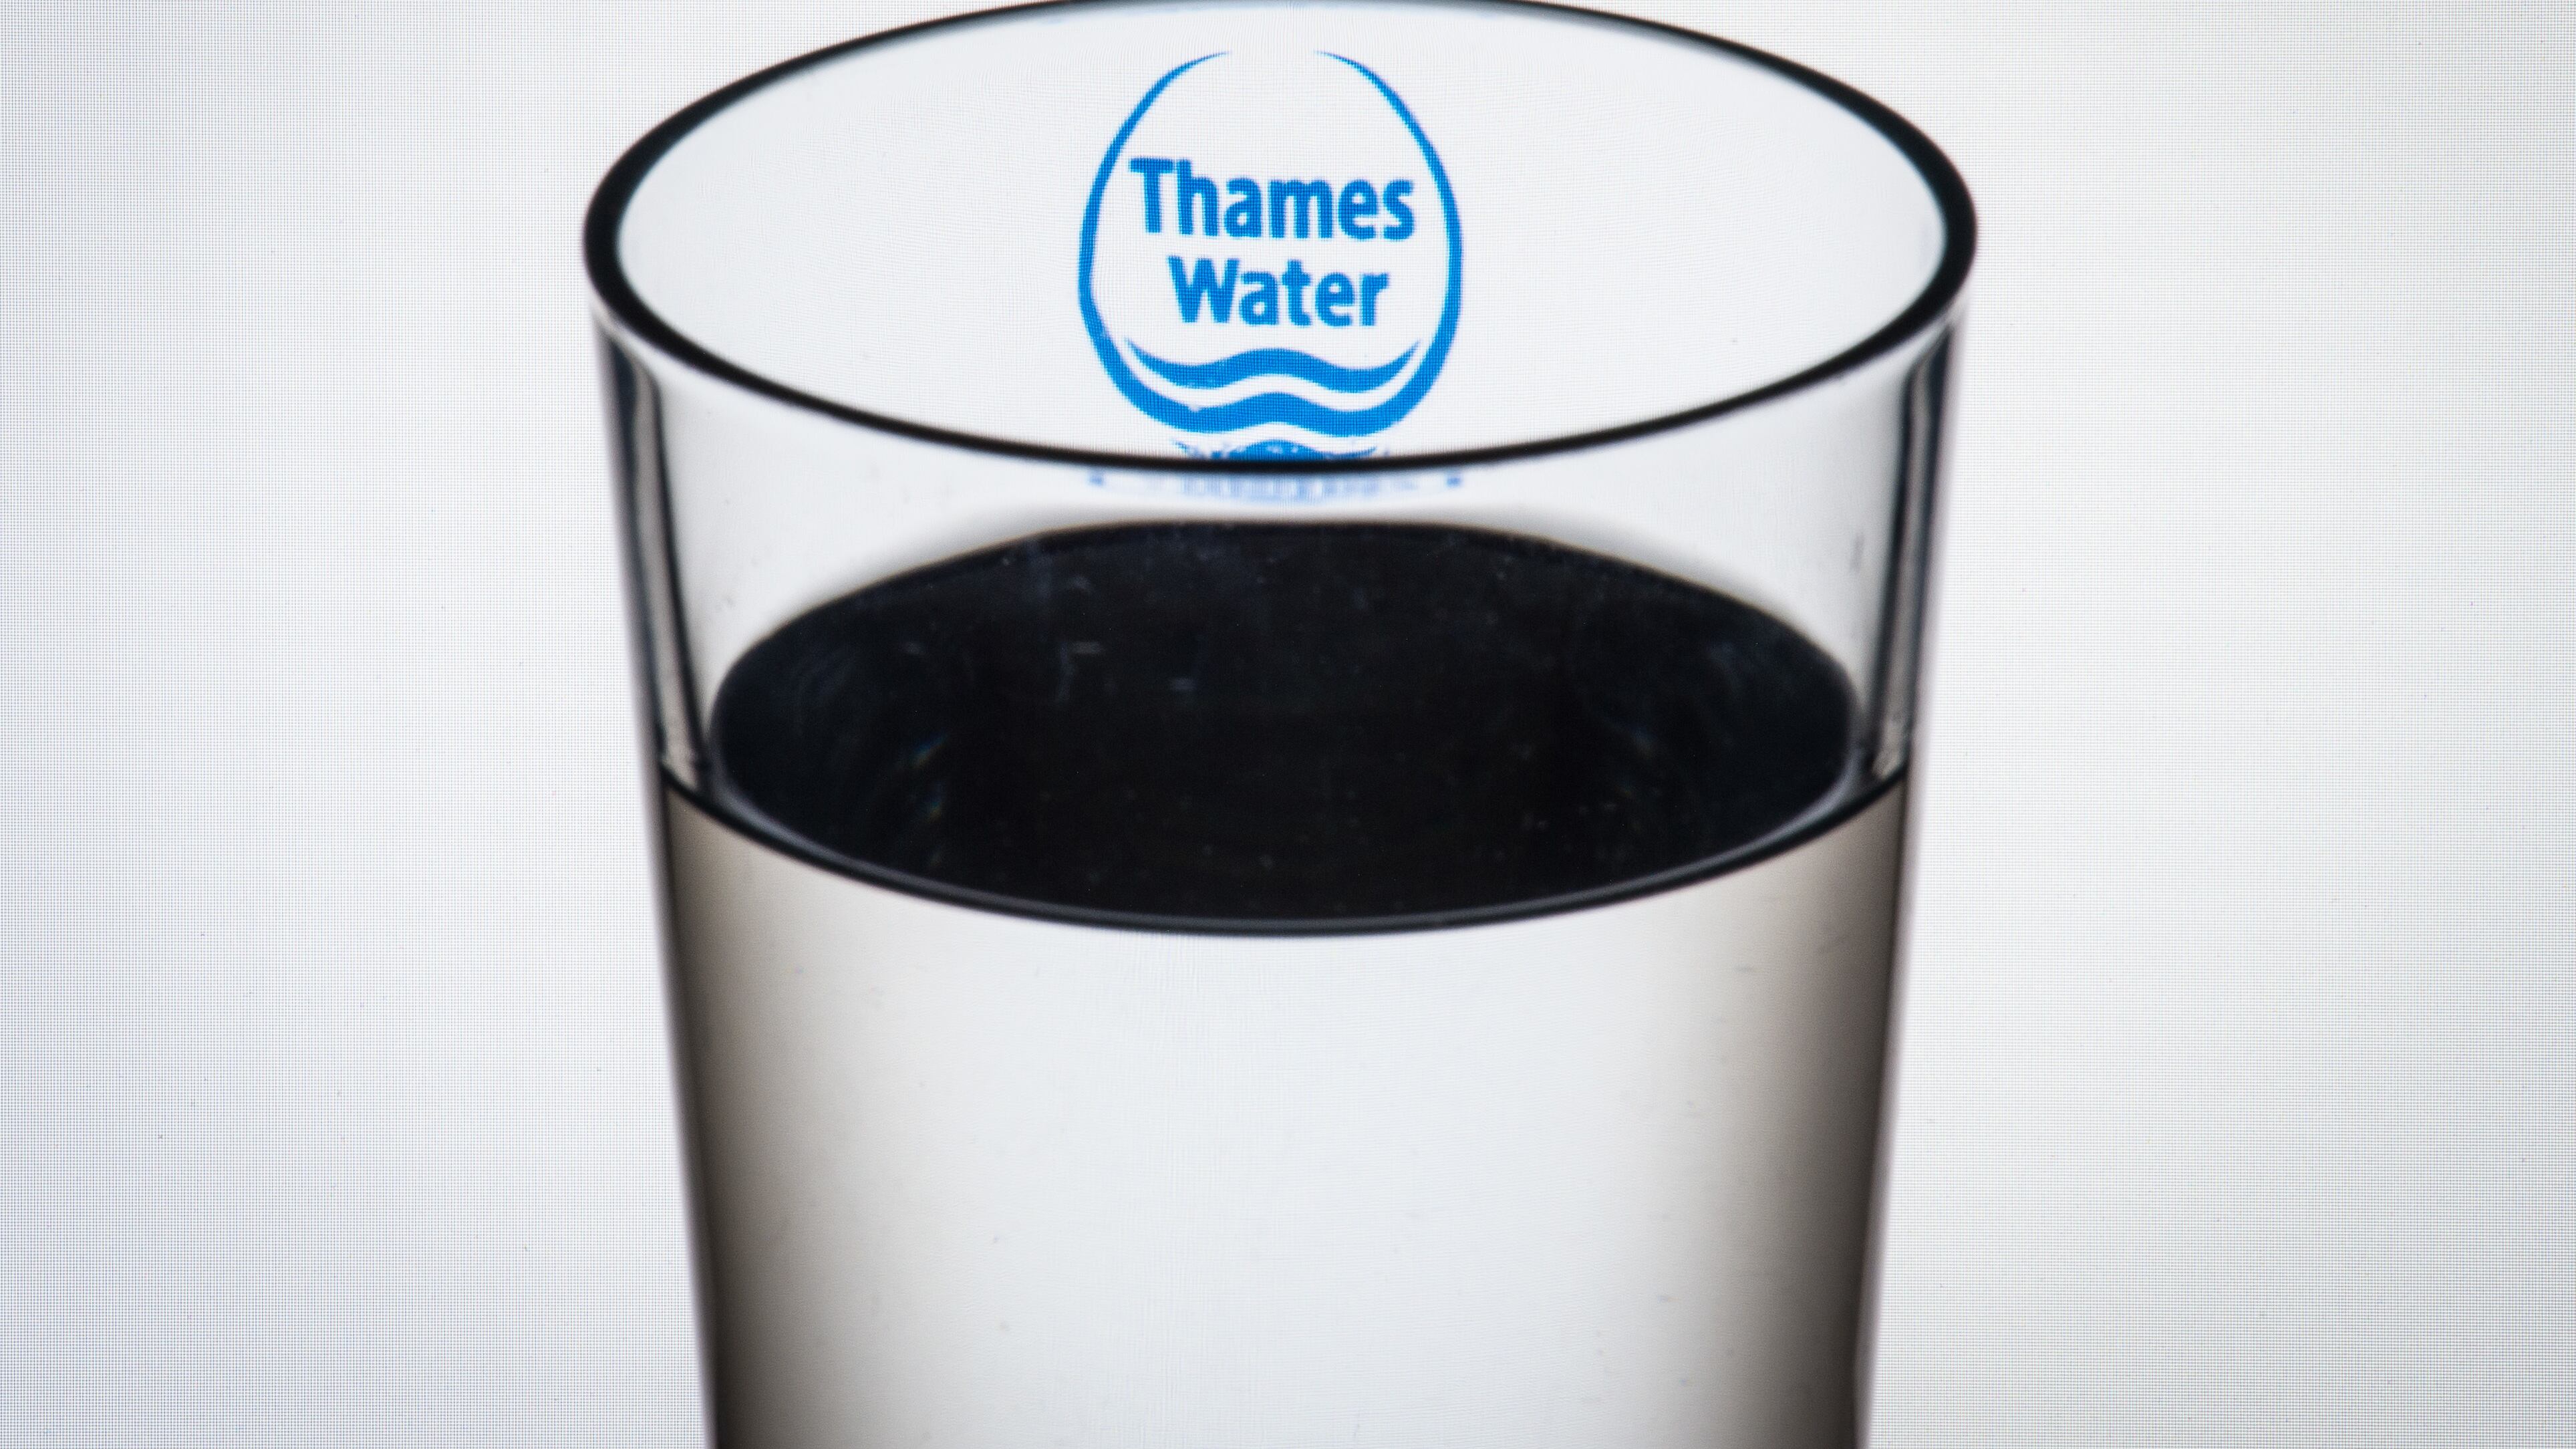 Thames Water is Britain’s biggest water firm, with 16 million customers in London and the Thames Valley region